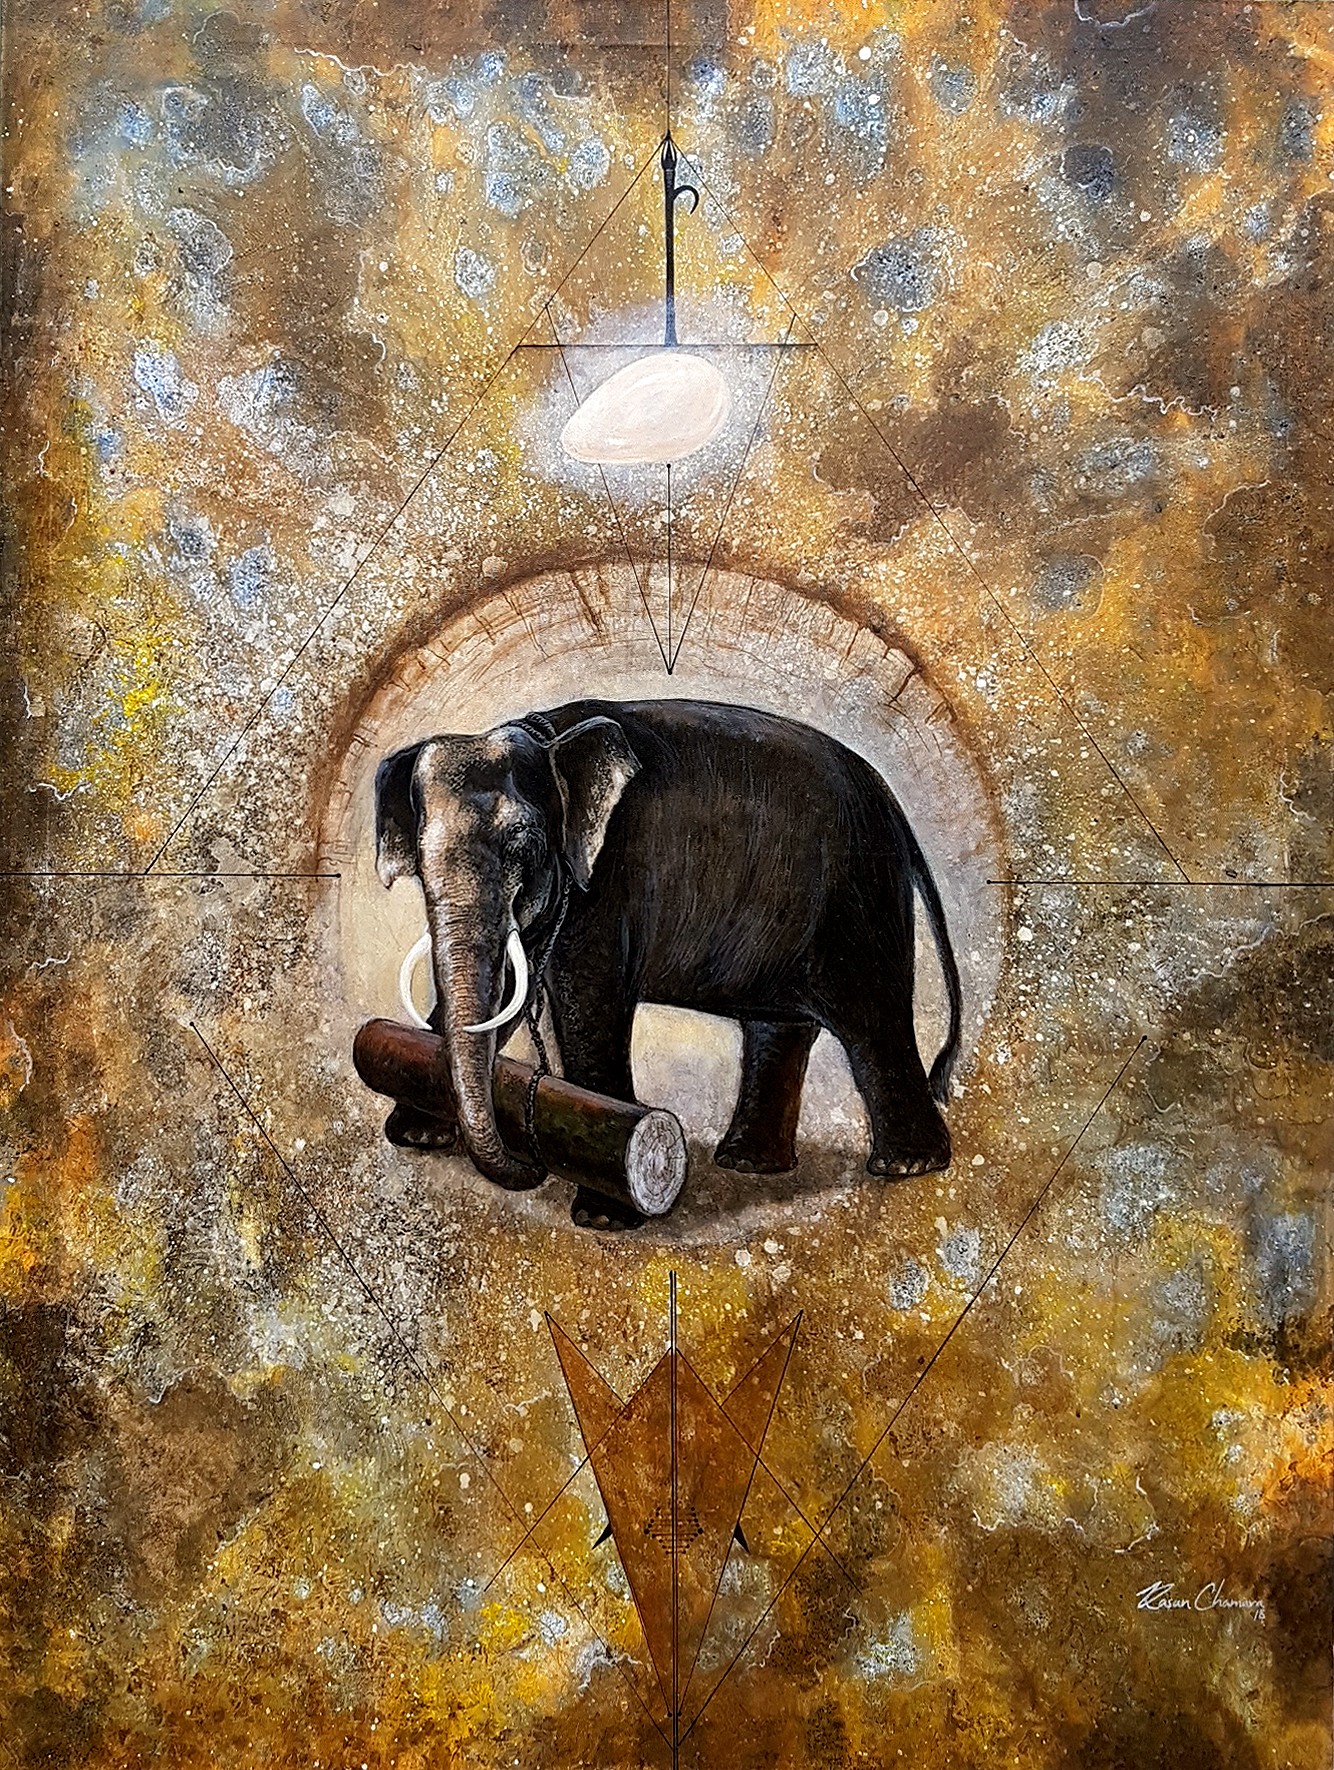 Elephant with Geometric Composition by kasun chamara wickramasinghe